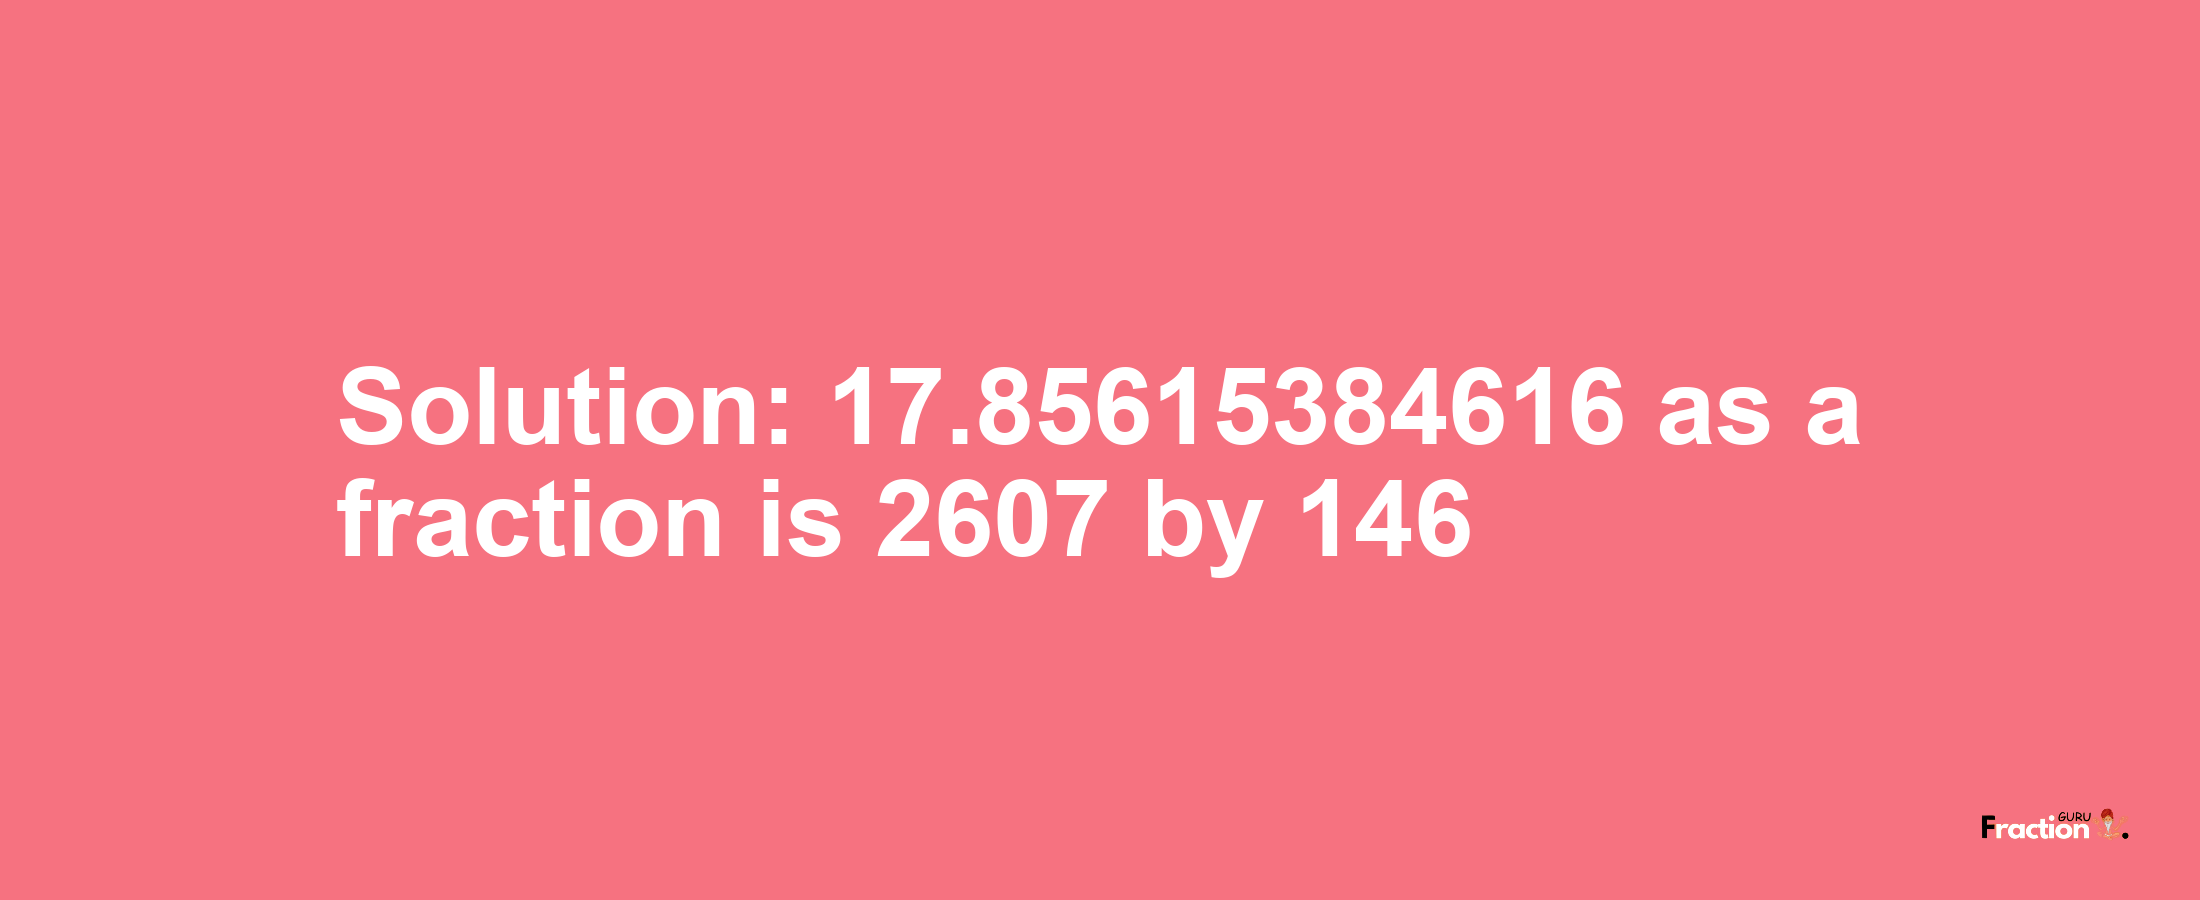 Solution:17.85615384616 as a fraction is 2607/146